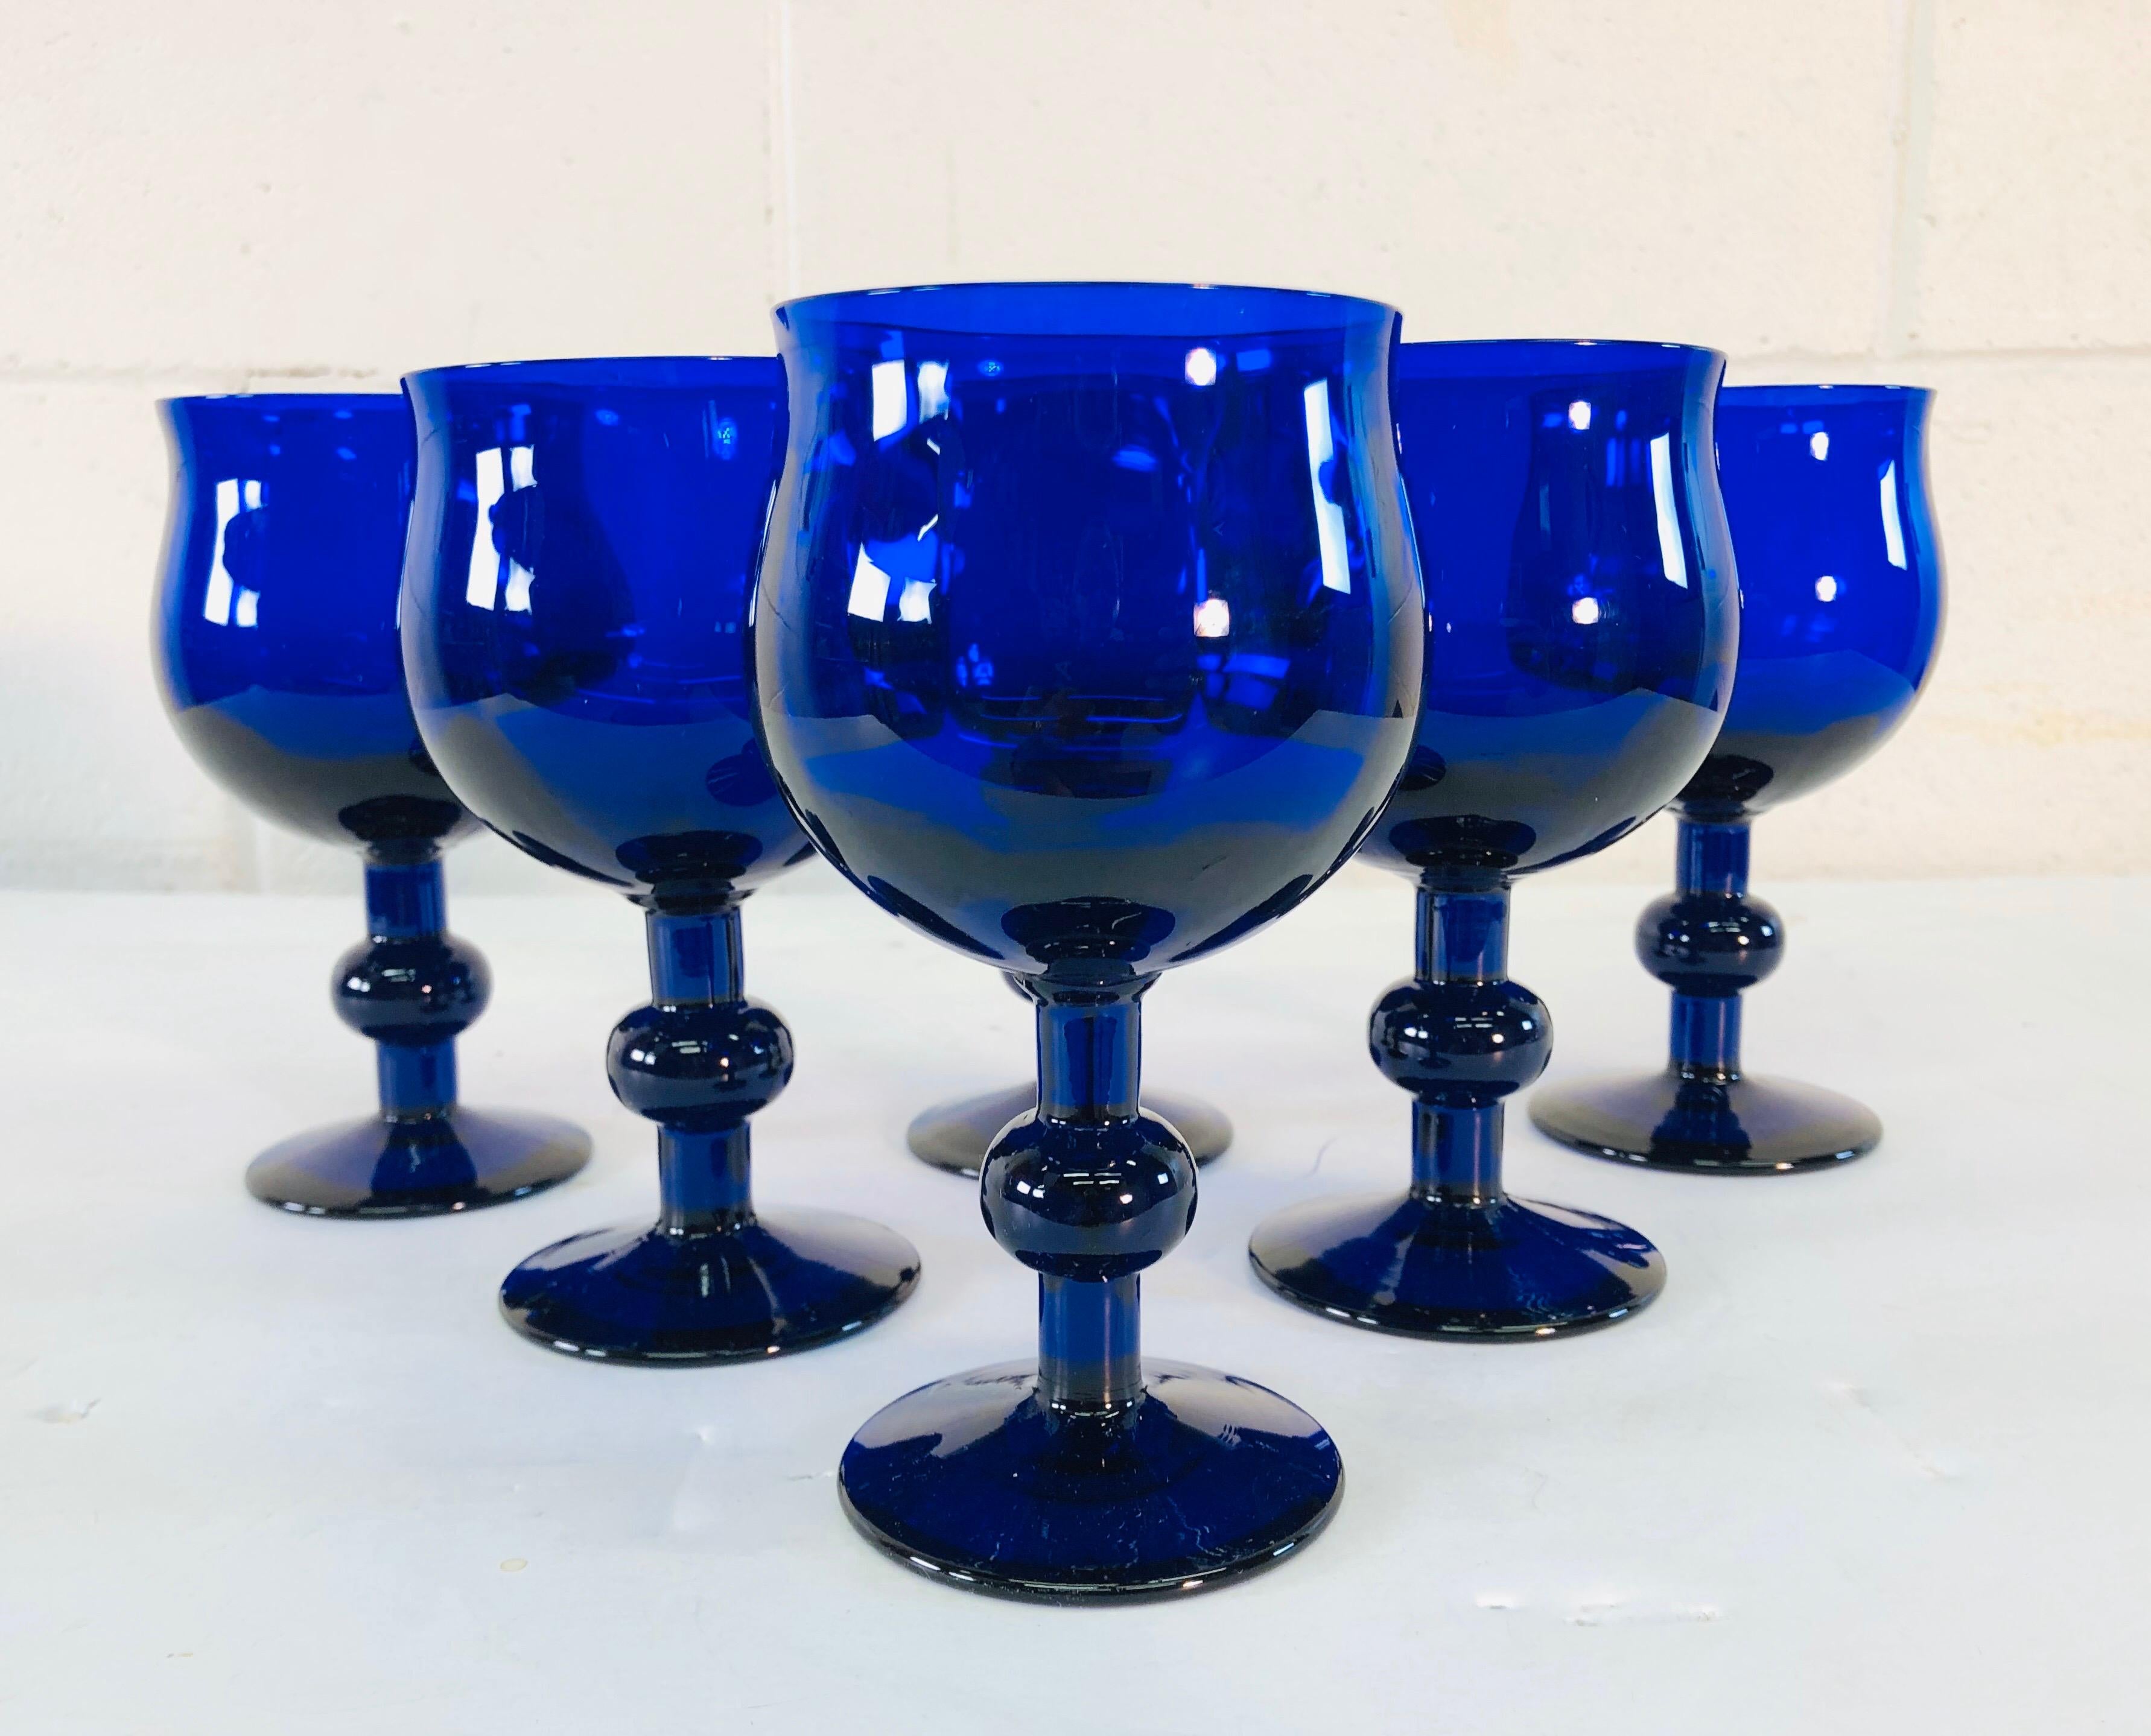 Art Deco style set of 6 cobalt glass wine stems with a ball accented stem. No marks. Excellent condition.